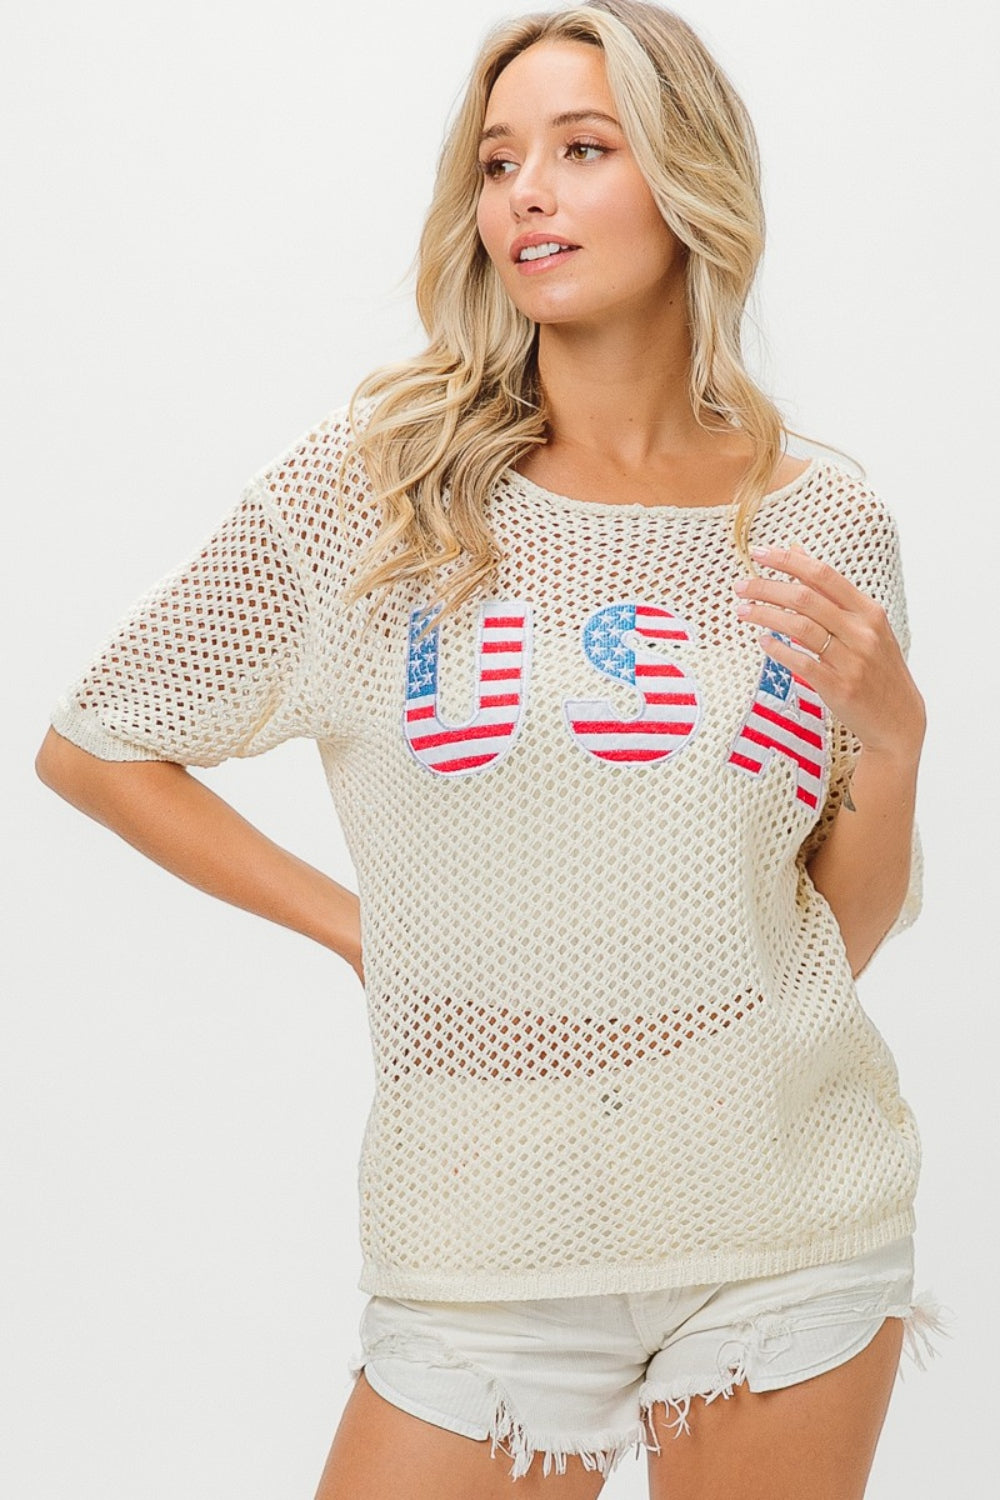 US Flag Theme Knit Cover Up